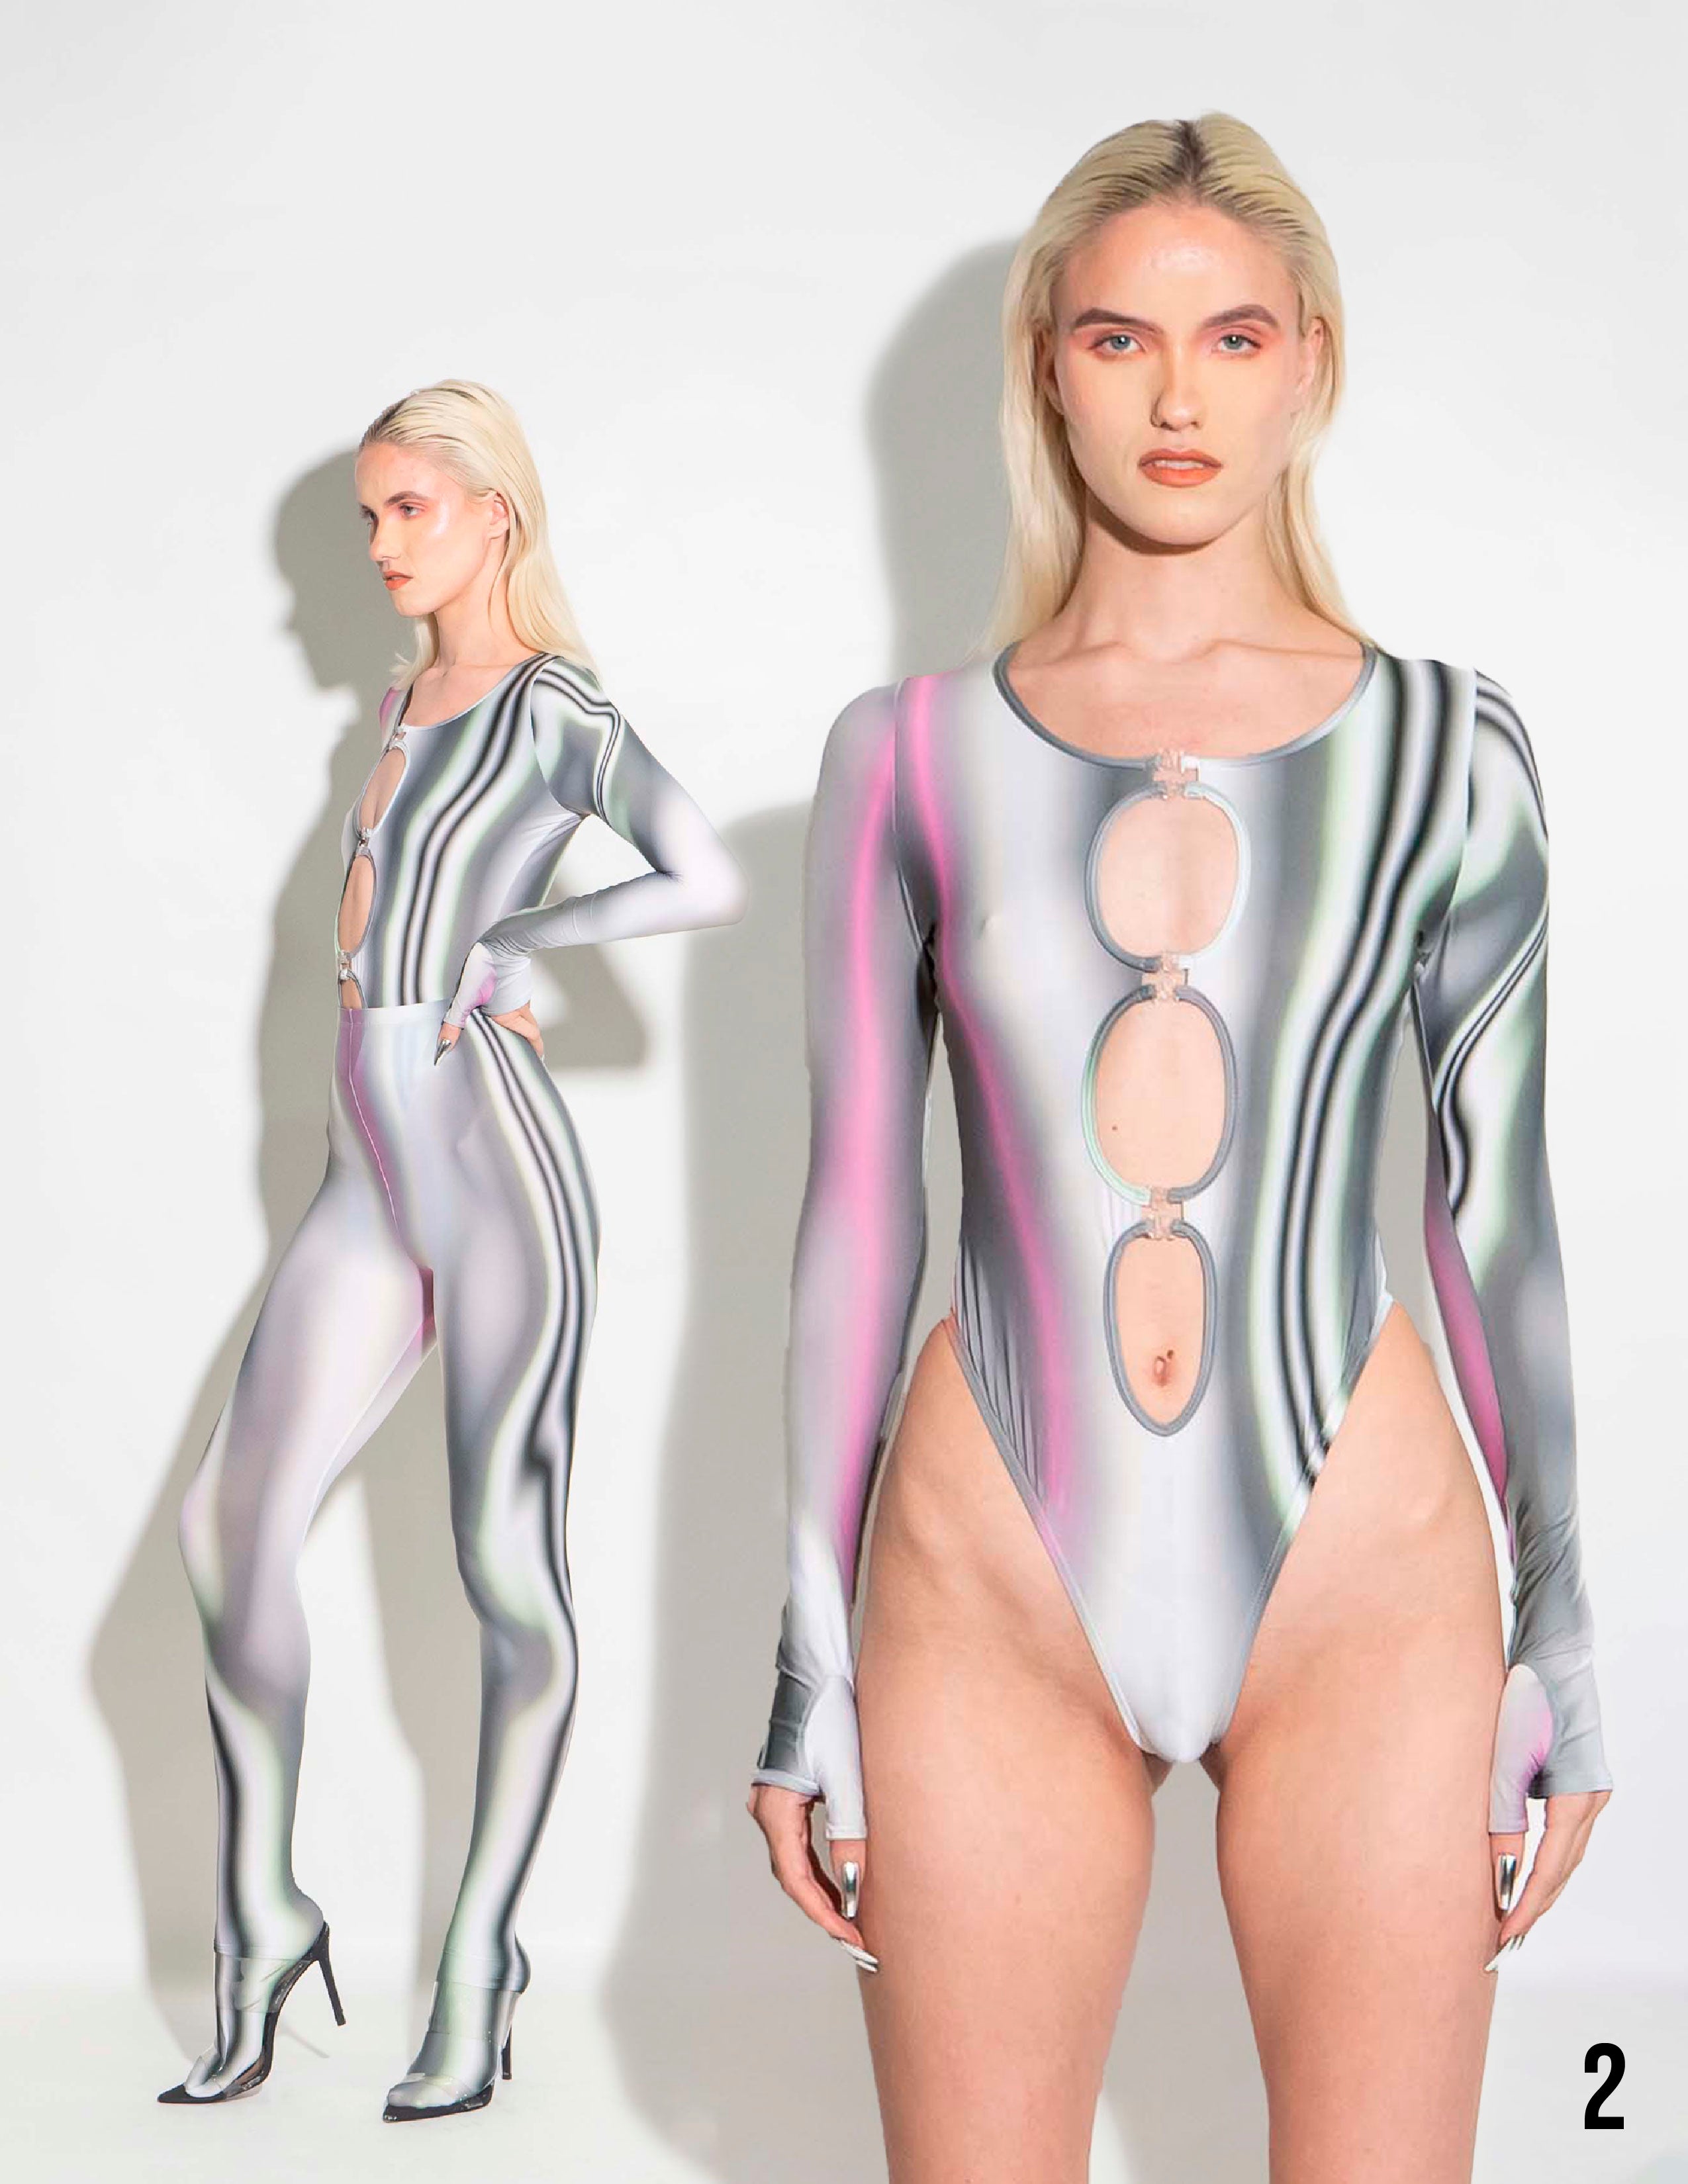 Second page of Andrew James new collection Transition 23 look book with rainbow chrome void bodysuit and matching stocking